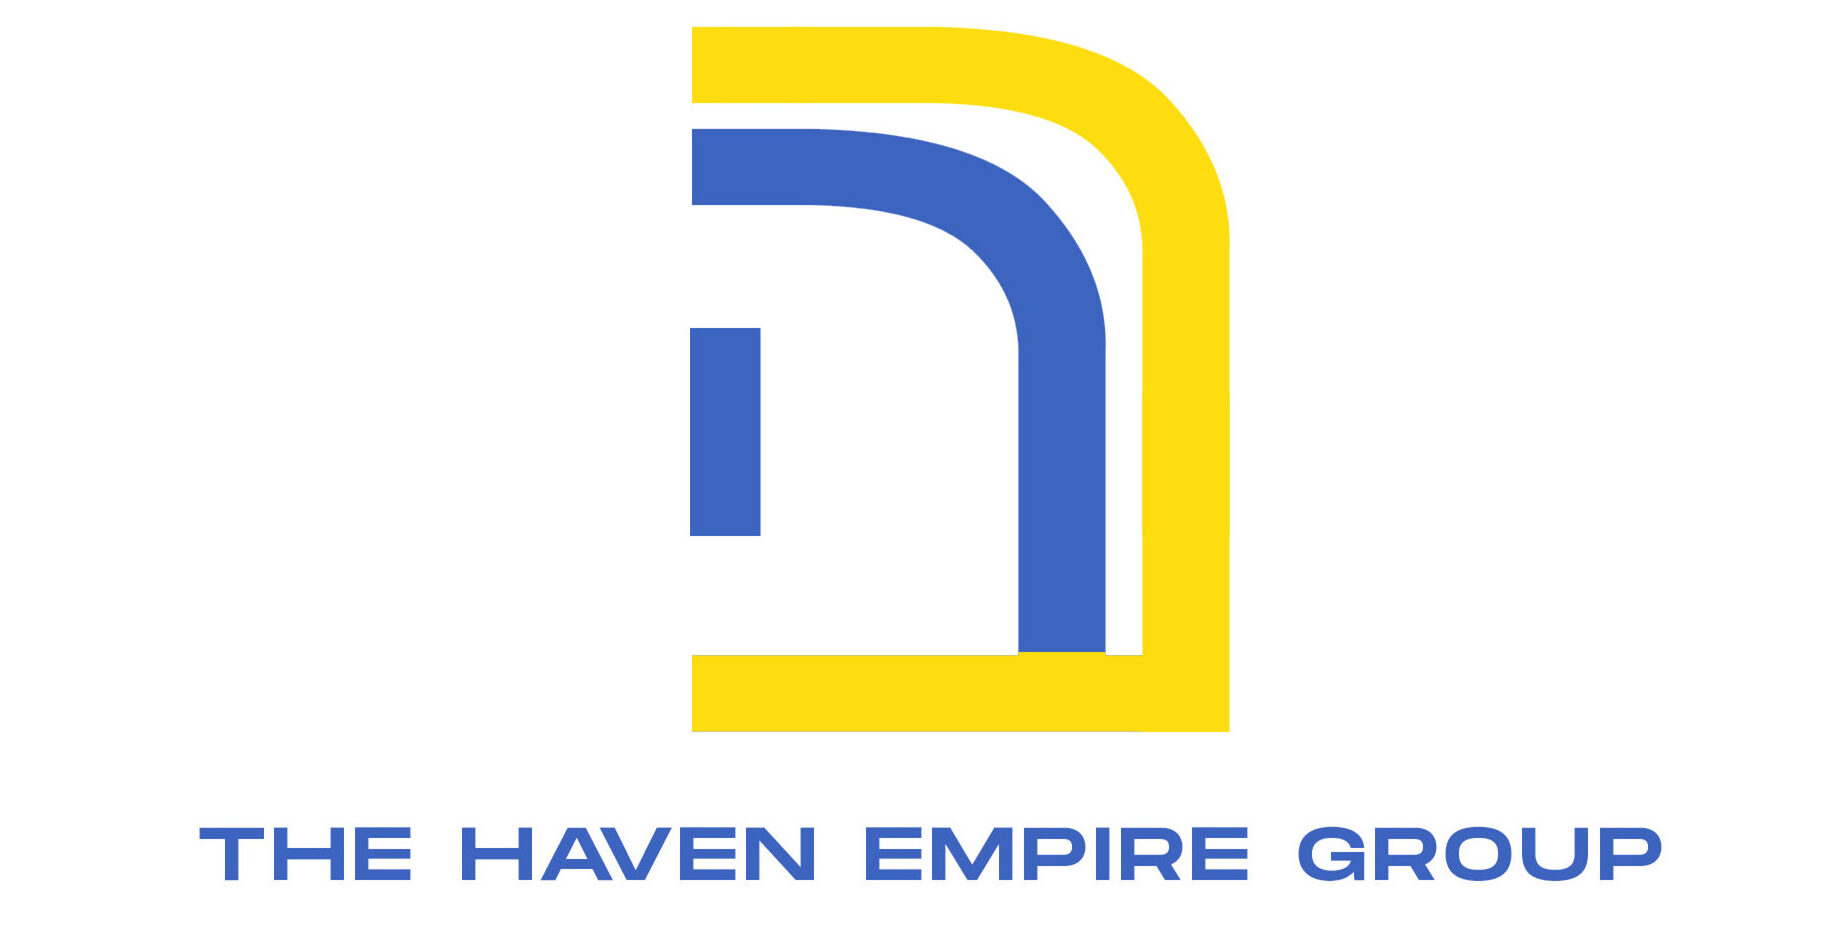 The Haven Empire Group